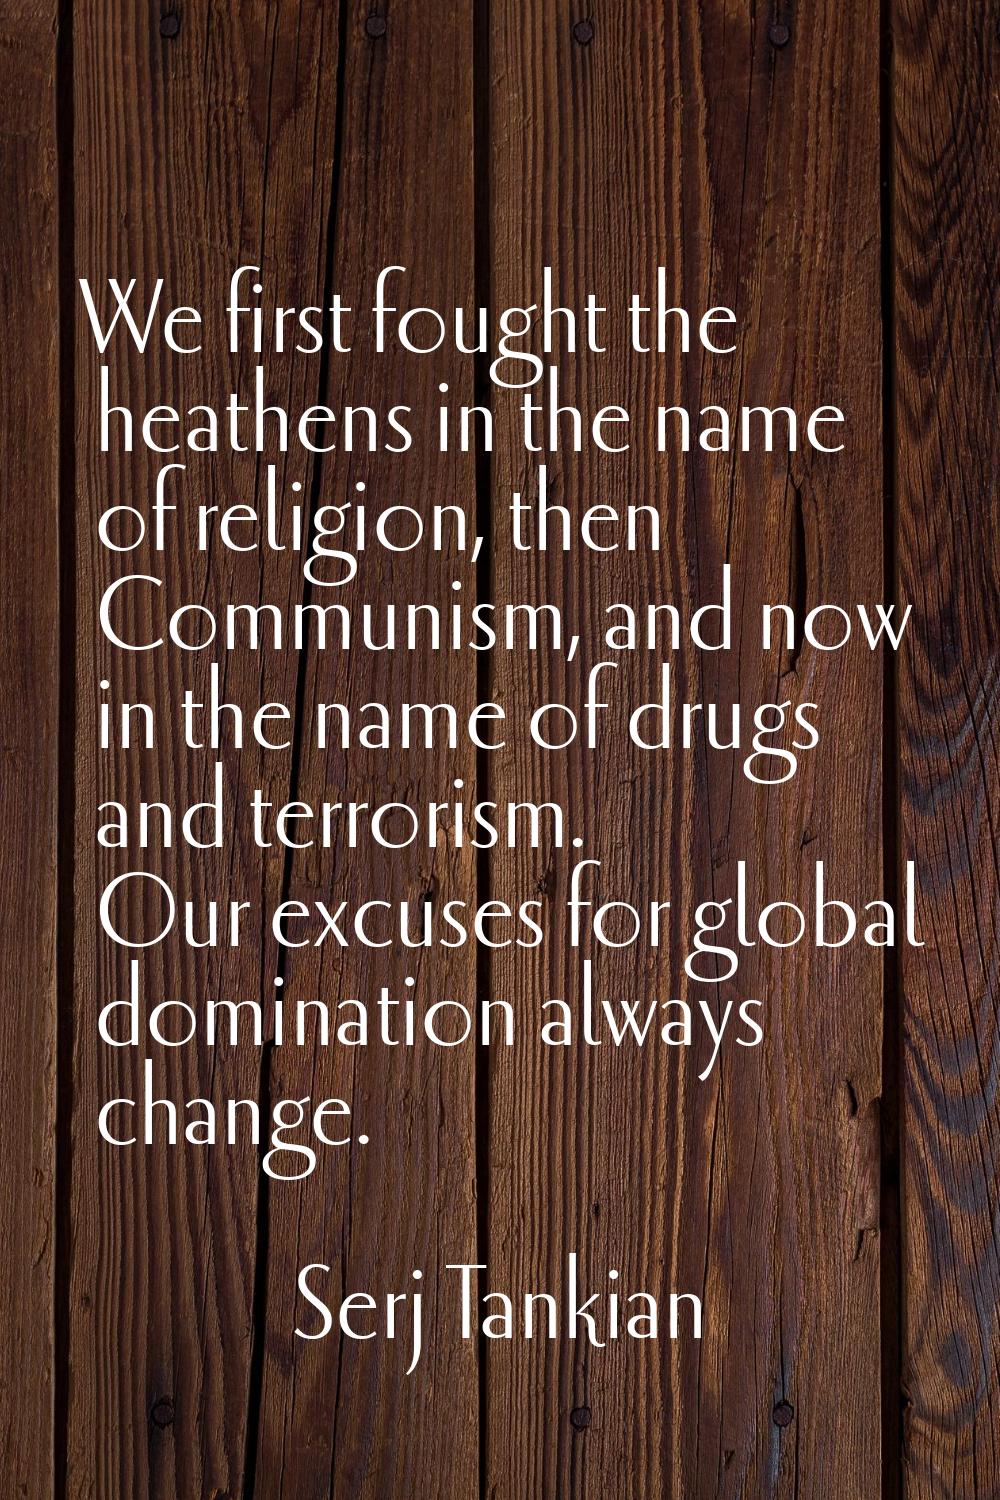 We first fought the heathens in the name of religion, then Communism, and now in the name of drugs 